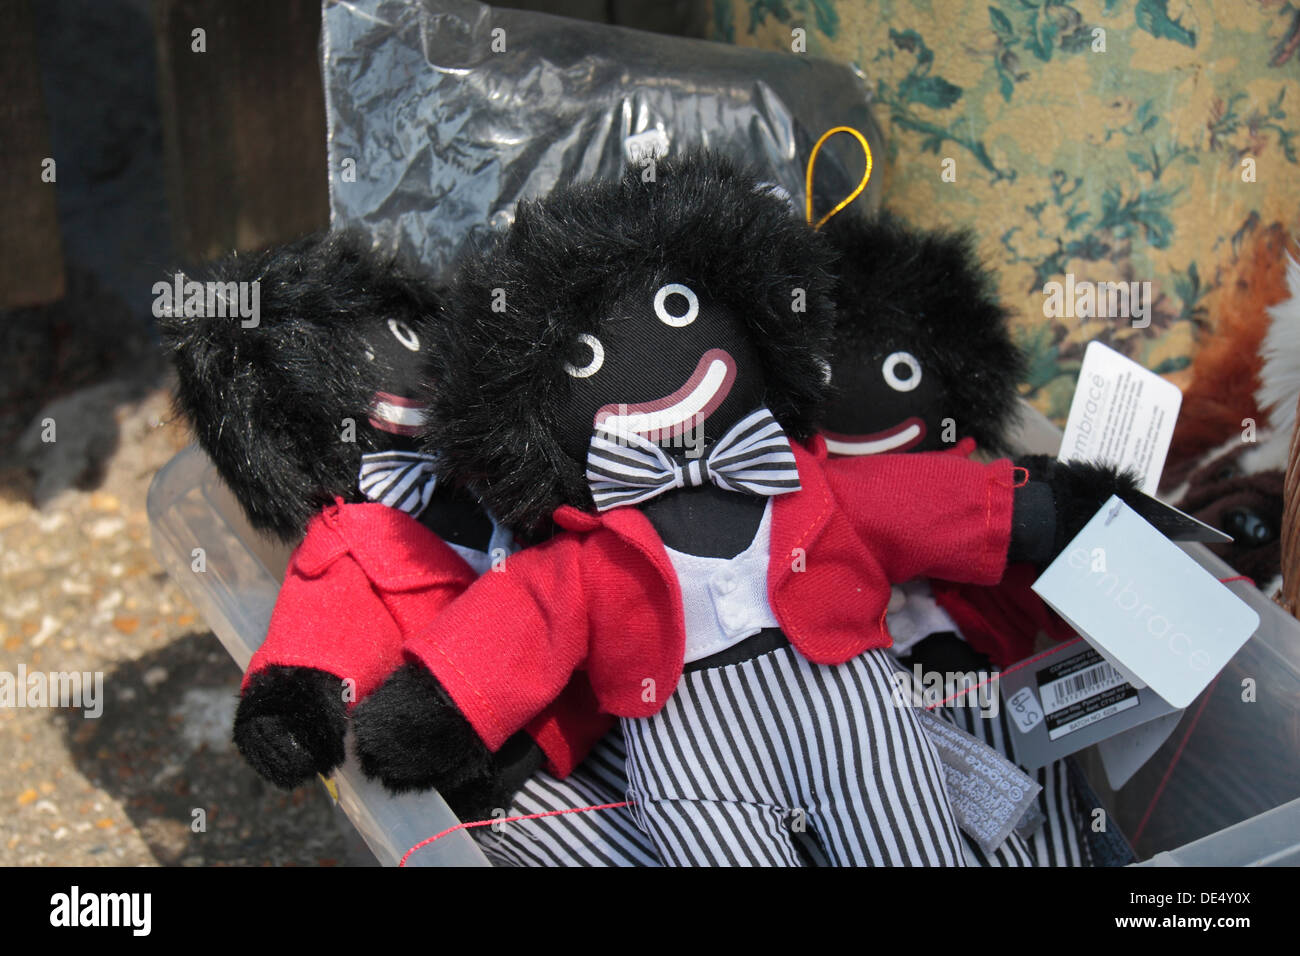 Golly (golliwogg) dolls on sale outside a tourist shop in Burley, New Forrest, Hampshire, UK. Stock Photo